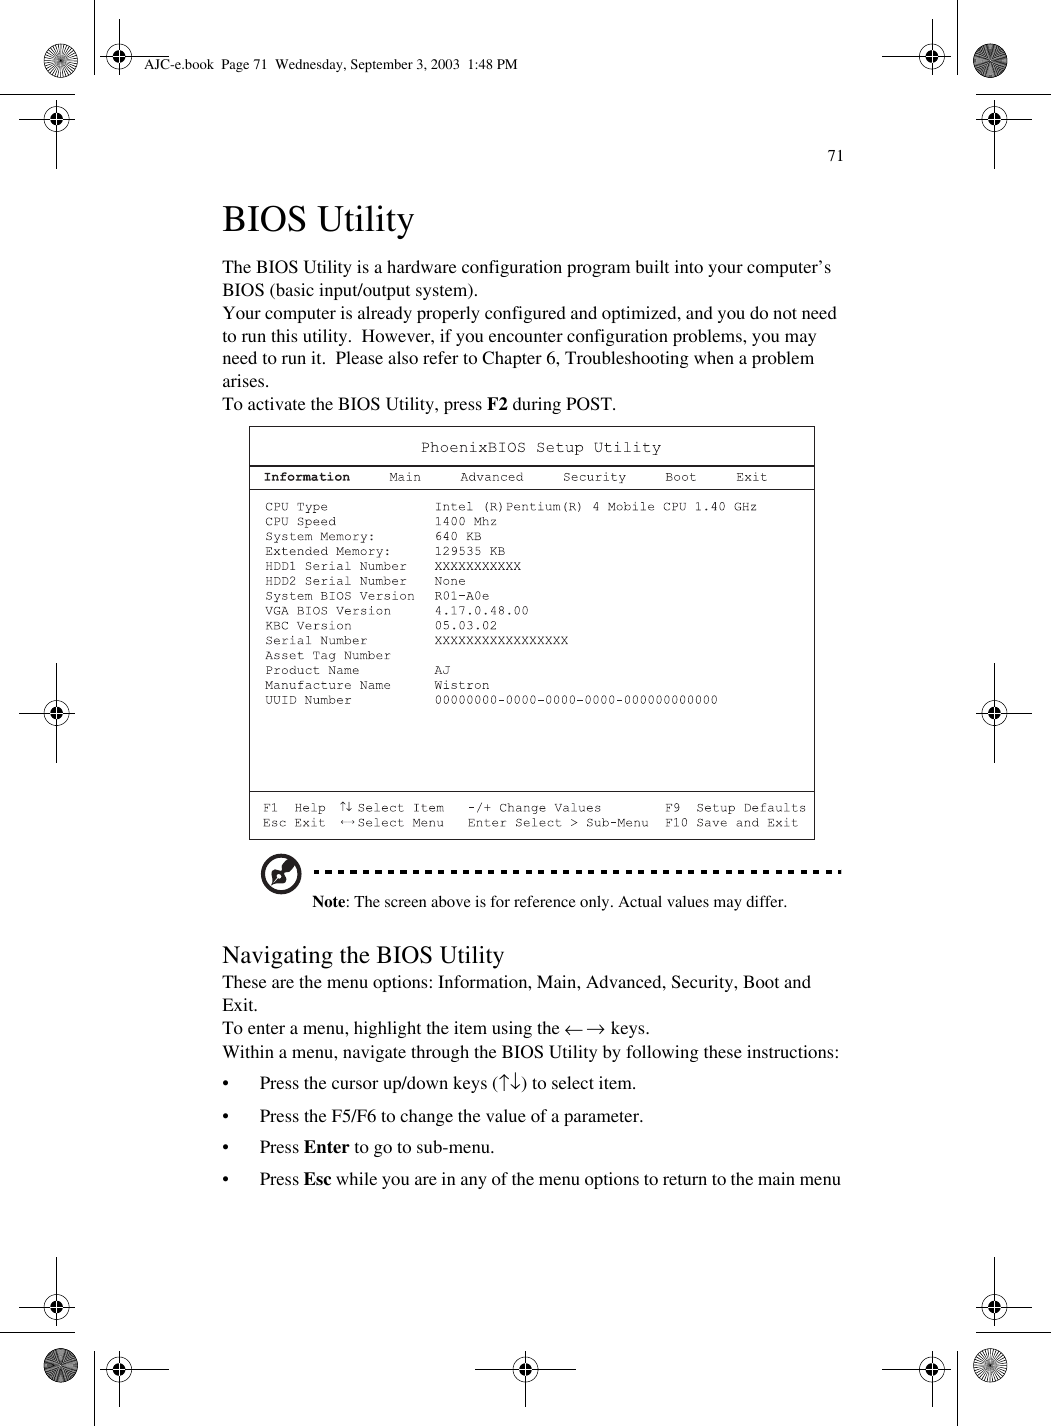 71BIOS UtilityThe BIOS Utility is a hardware configuration program built into your computer’s BIOS (basic input/output system).Your computer is already properly configured and optimized, and you do not need to run this utility.  However, if you encounter configuration problems, you may need to run it.  Please also refer to Chapter 6, Troubleshooting when a problem arises.To activate the BIOS Utility, press F2 during POST.  Note: The screen above is for reference only. Actual values may differ.Navigating the BIOS UtilityThese are the menu options: Information, Main, Advanced, Security, Boot and Exit. To enter a menu, highlight the item using the ← → keys.Within a menu, navigate through the BIOS Utility by following these instructions:• Press the cursor up/down keys (↑↓) to select item.• Press the F5/F6 to change the value of a parameter.•Press Enter to go to sub-menu.•Press Esc while you are in any of the menu options to return to the main menuAJC-e.book  Page 71  Wednesday, September 3, 2003  1:48 PM